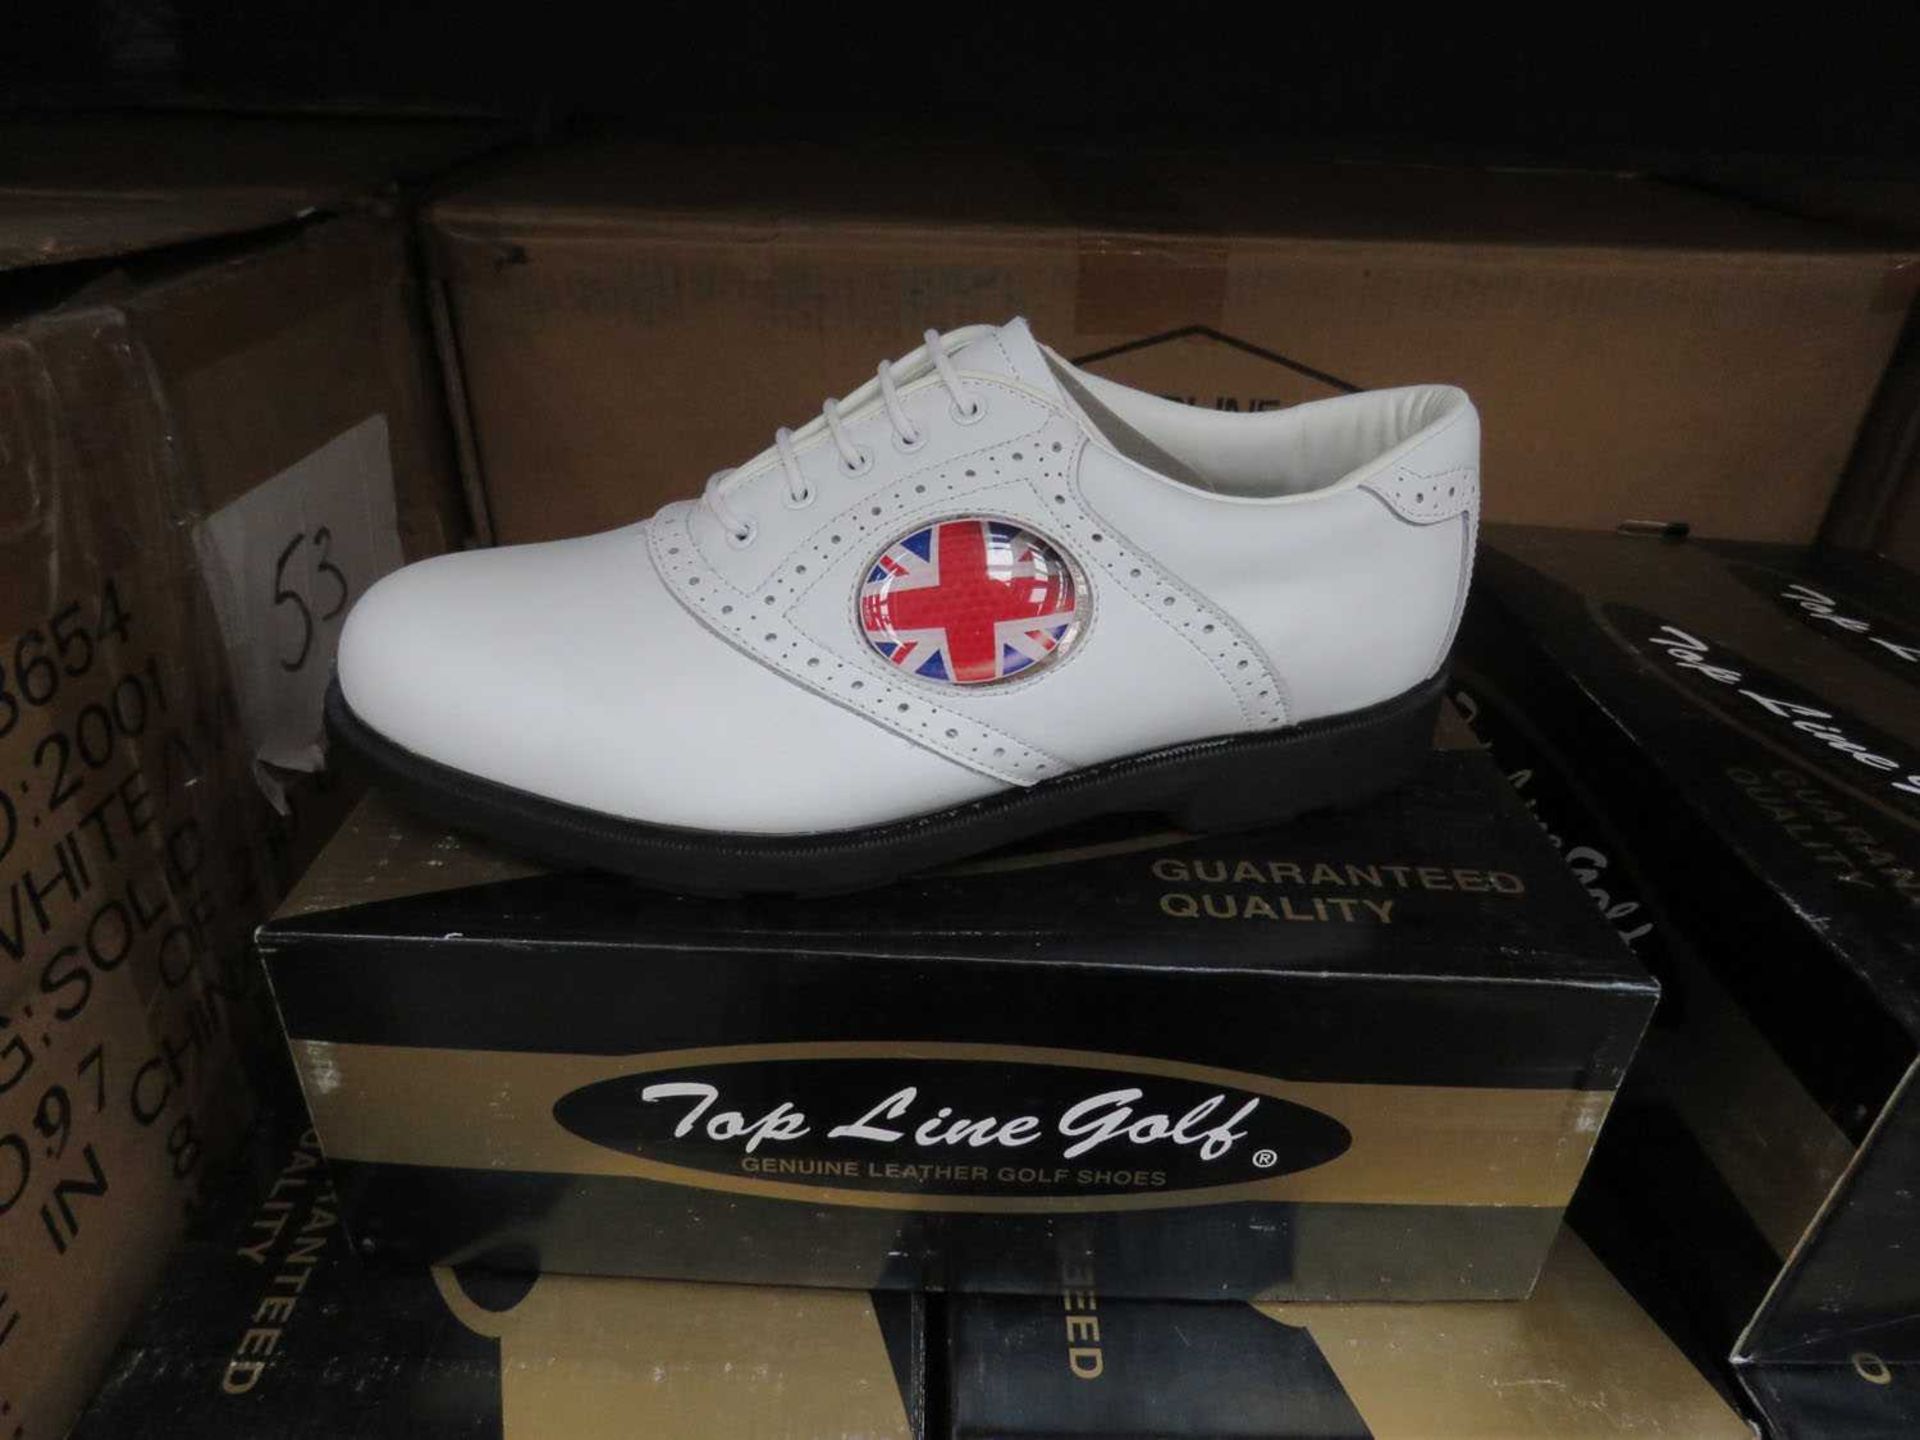 3 boxes containing large quantity of Genuine Leather Topline golf shoes and 5 loose pairs - Image 2 of 2